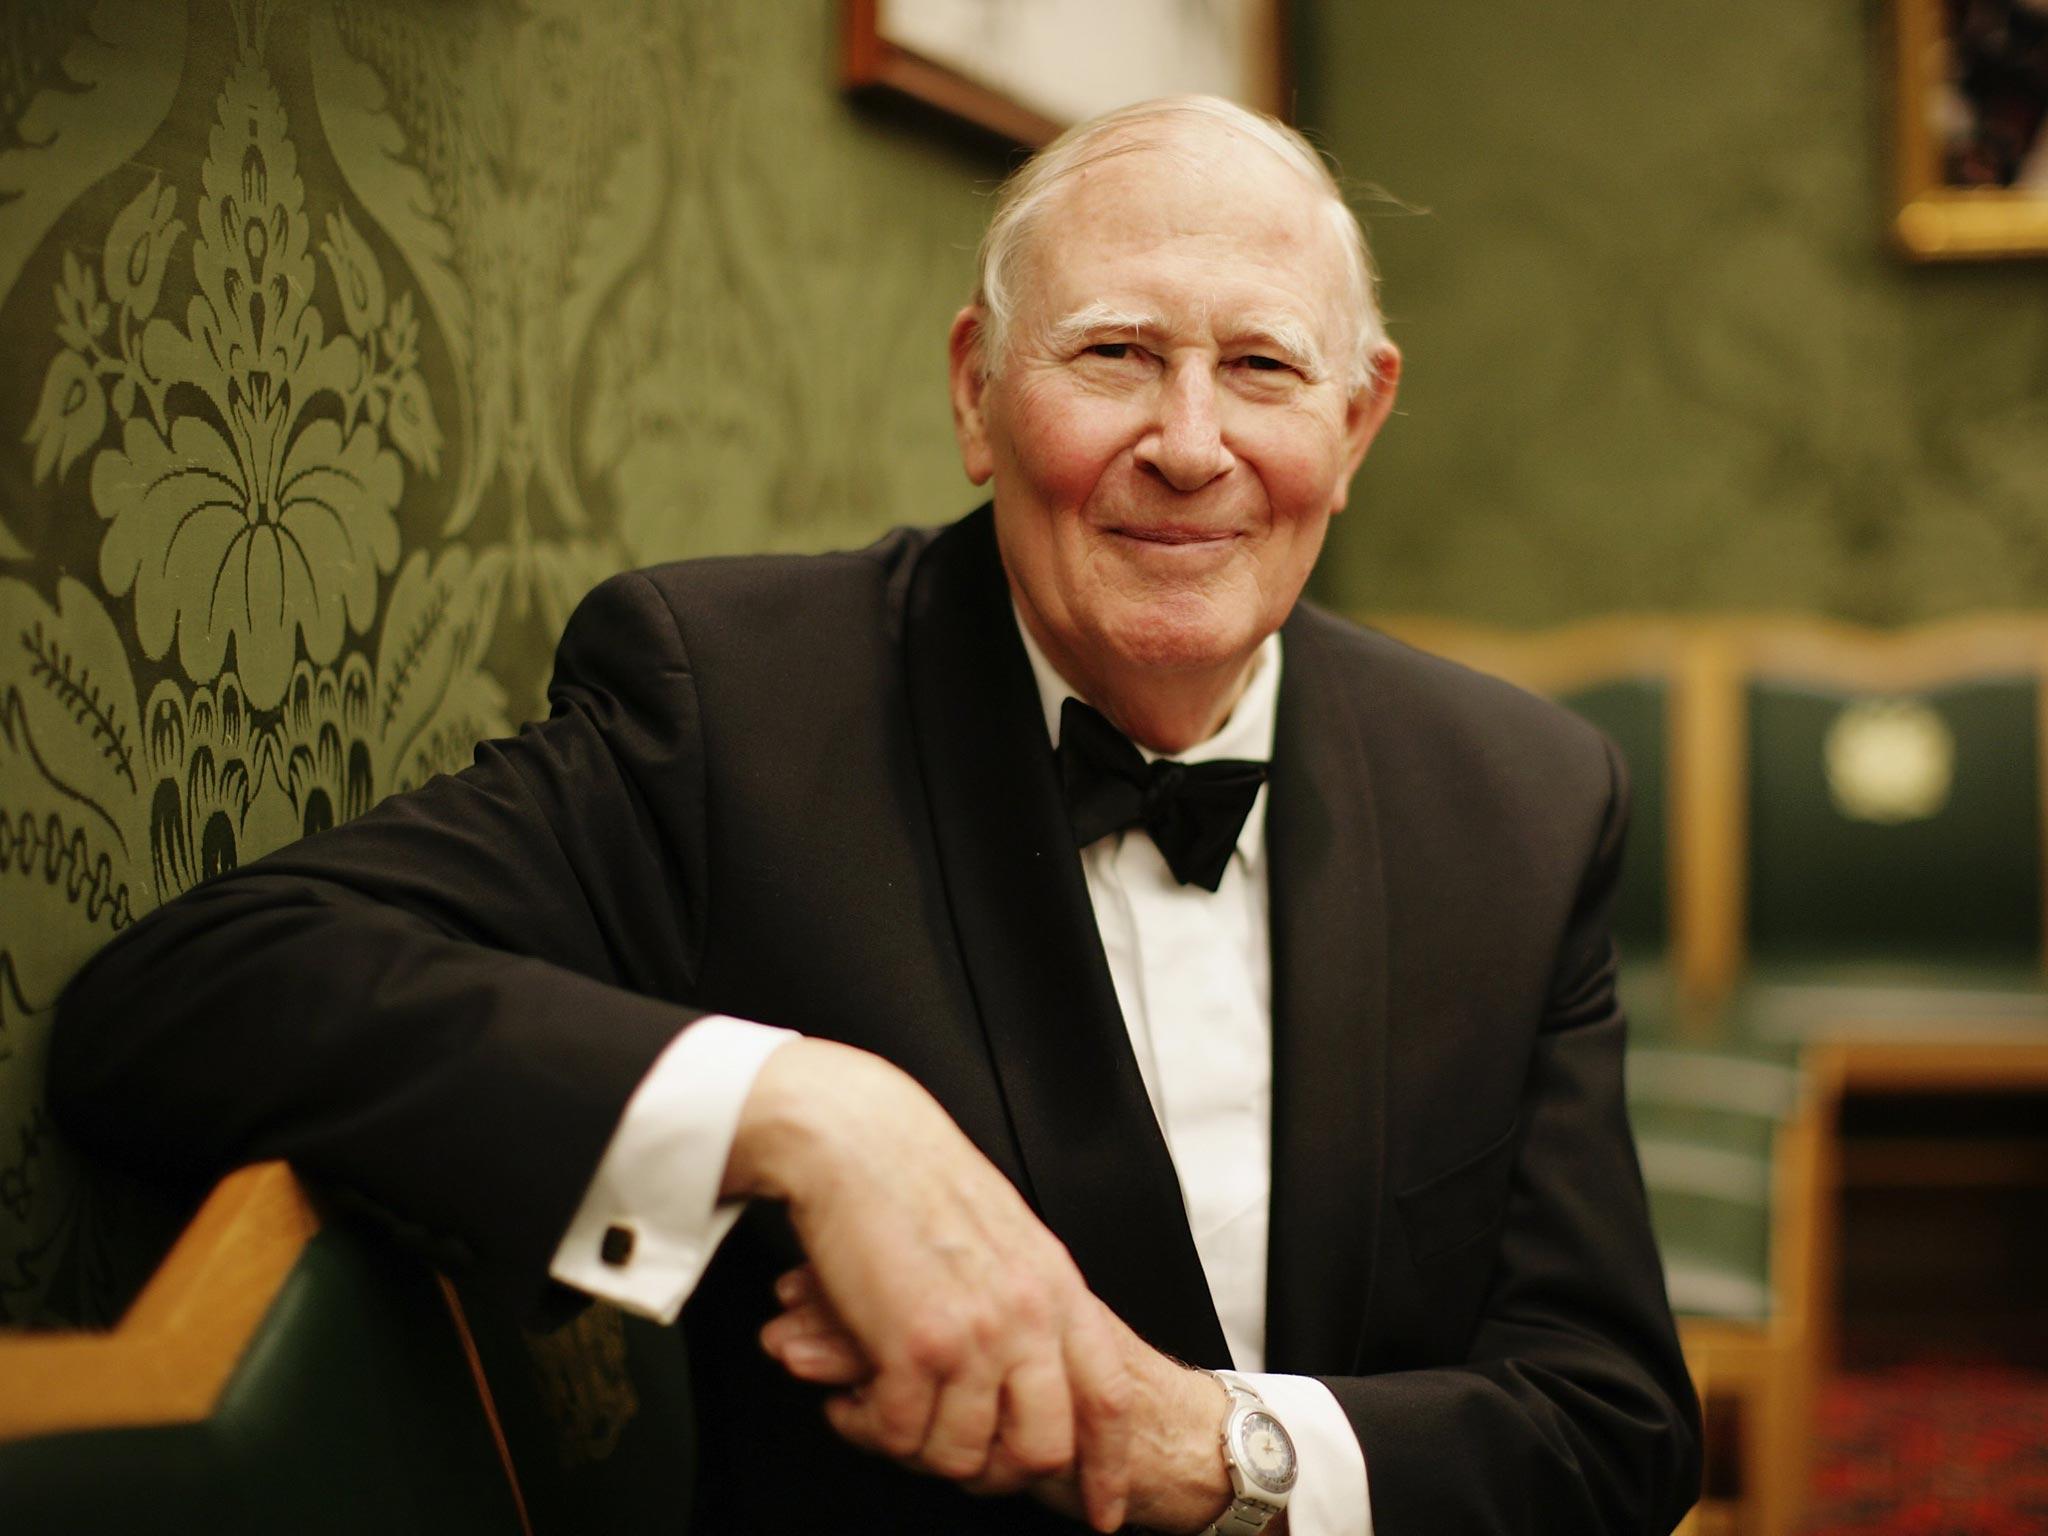 Sir Roger Bannister poses for a photograph while attending the Morgan Stanley Great Britons Awards 2006 at the Guildhall on January 18, 2007 in London, England.